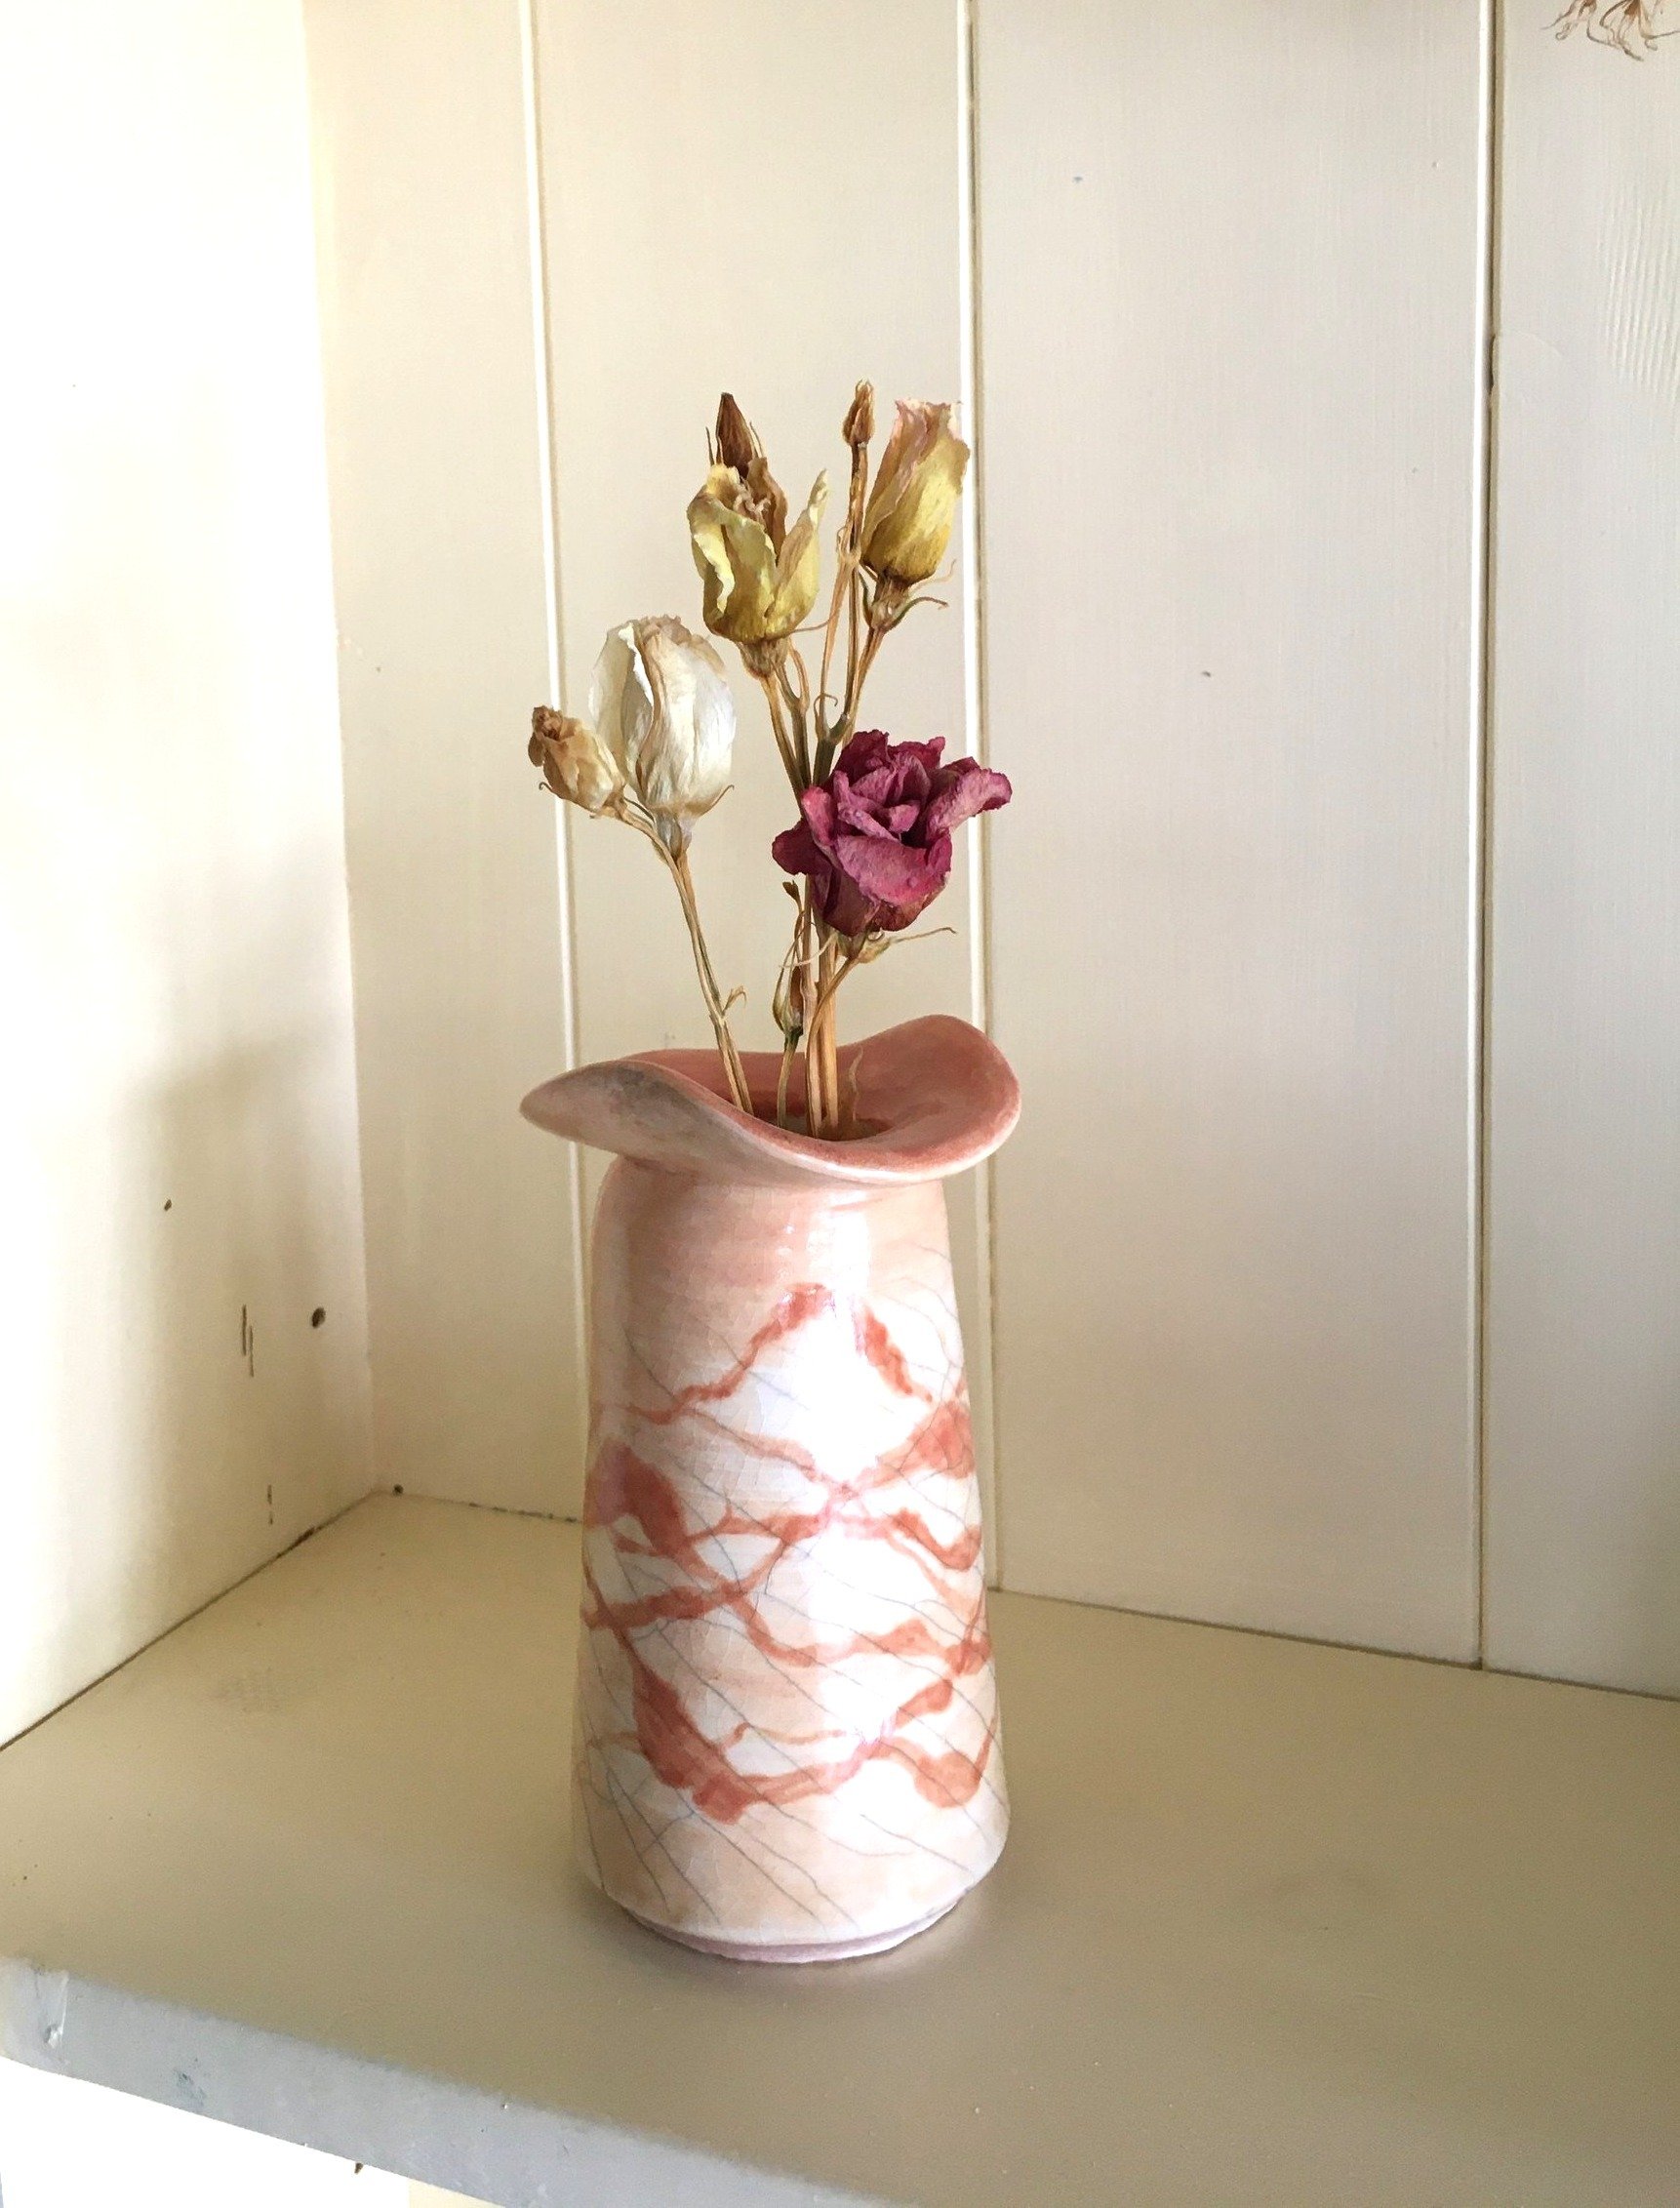 Peach waves and crackle vase